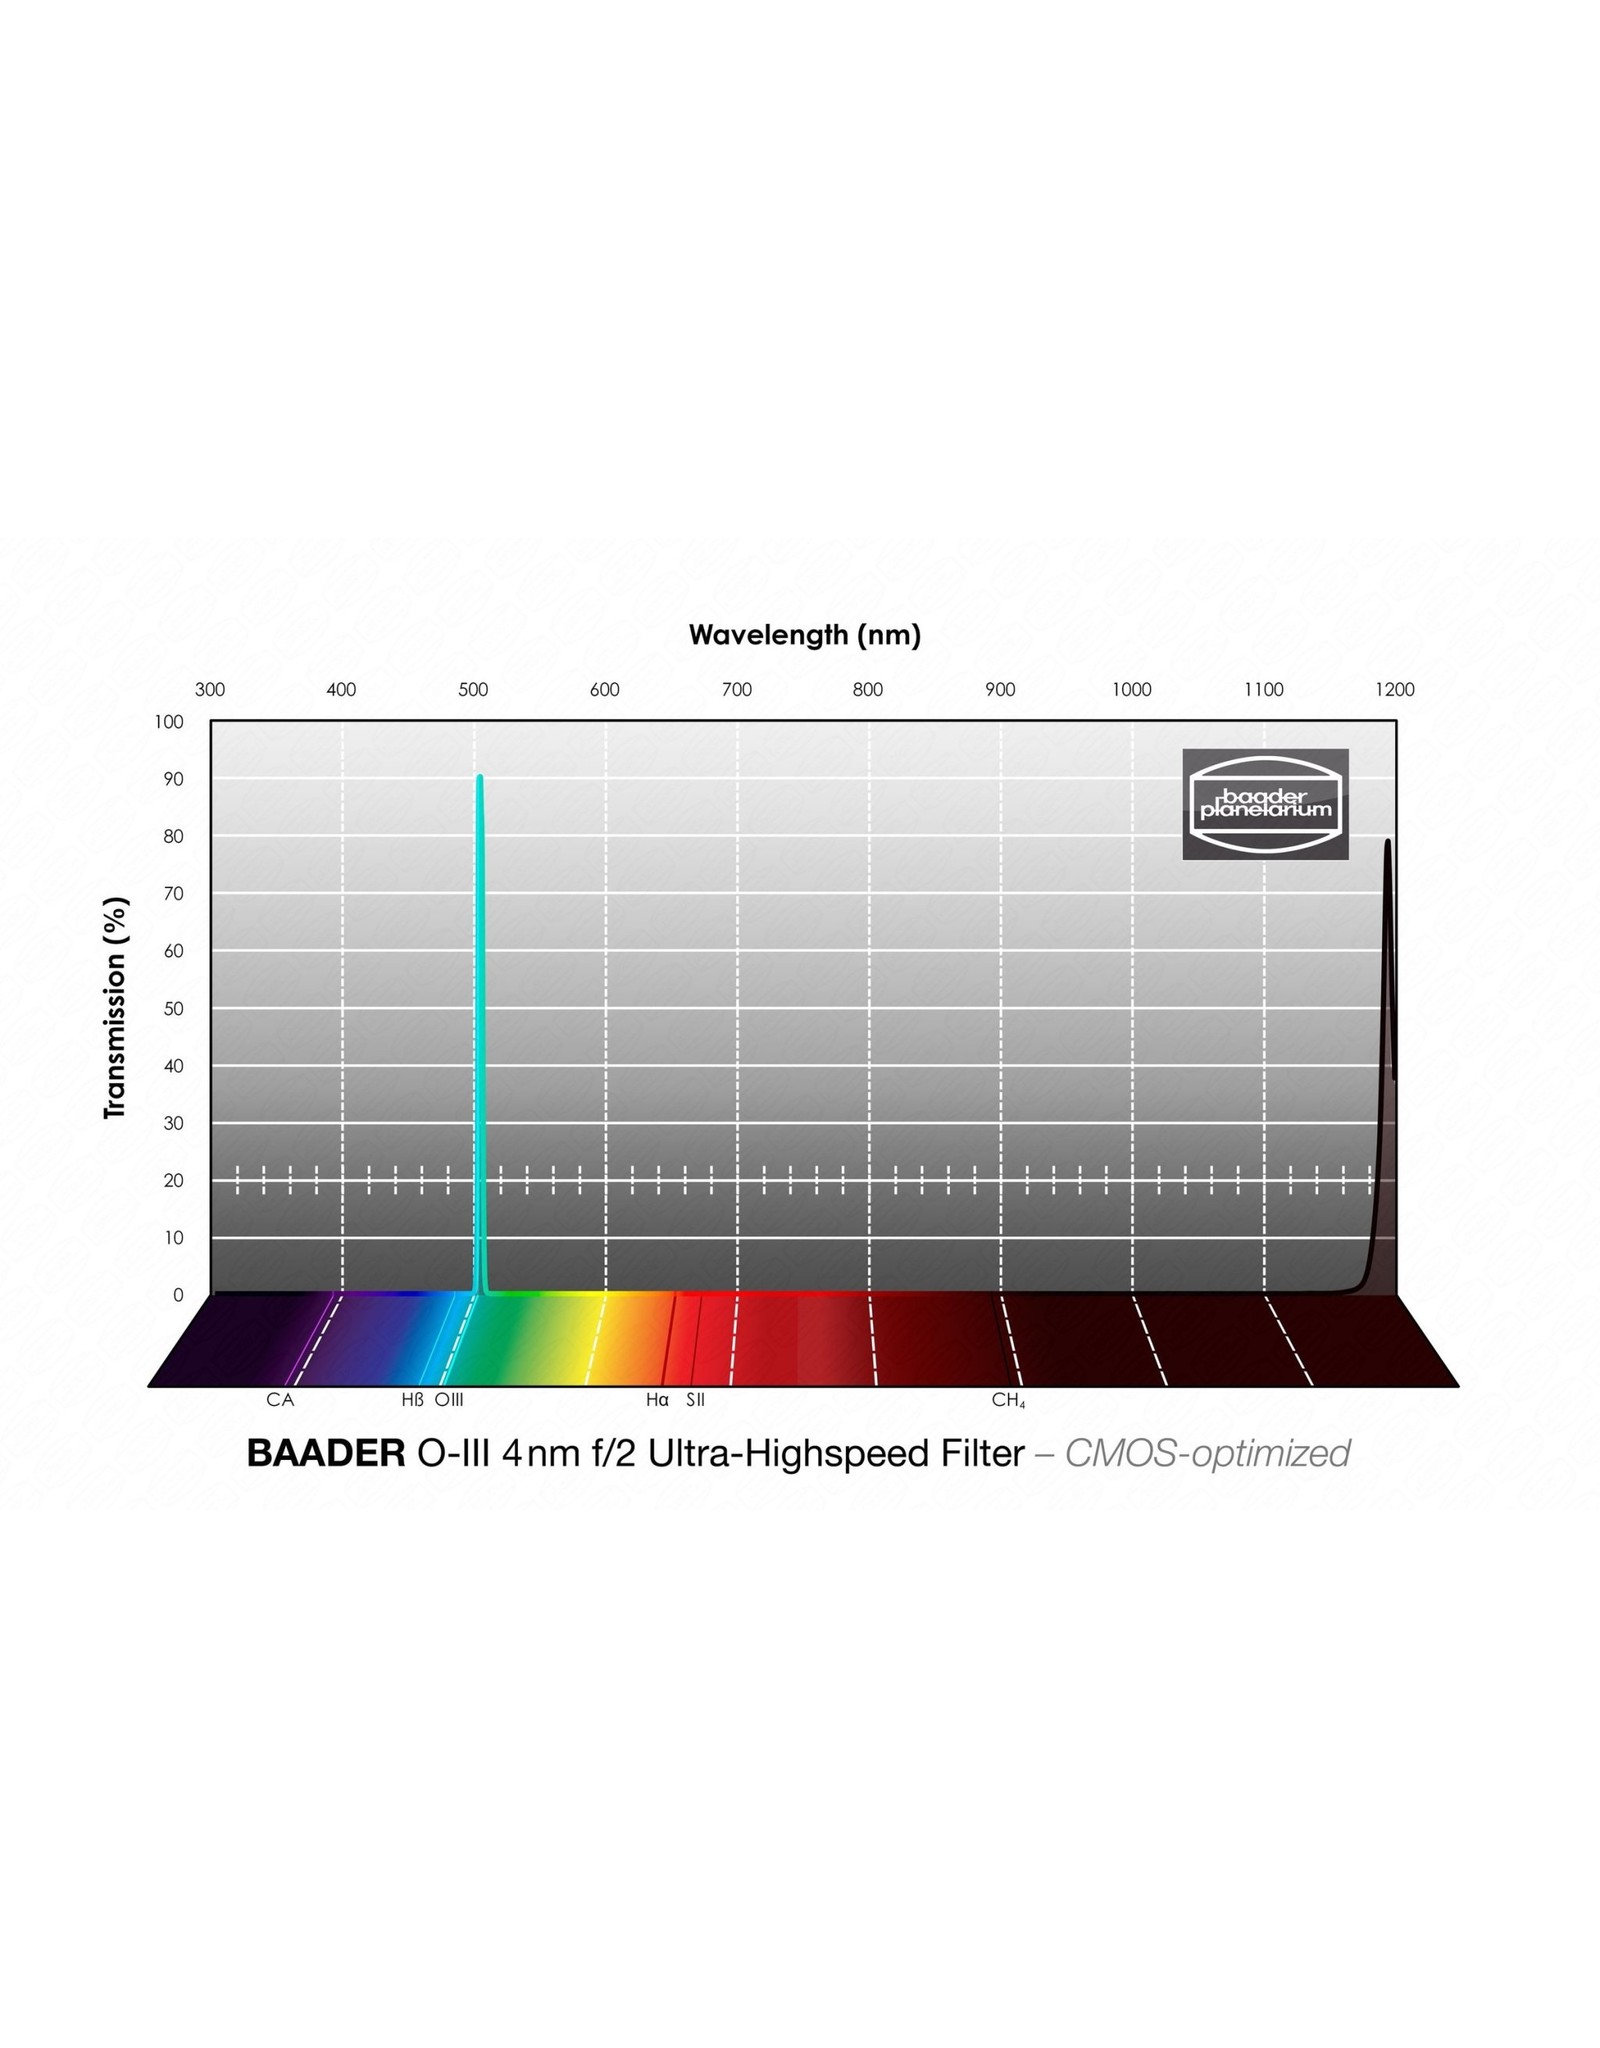 Baader Planetarium Baader 4nm f/2 Ultra-Highspeed Oxygen-III Filters – CMOS-optimized (Specify Size)